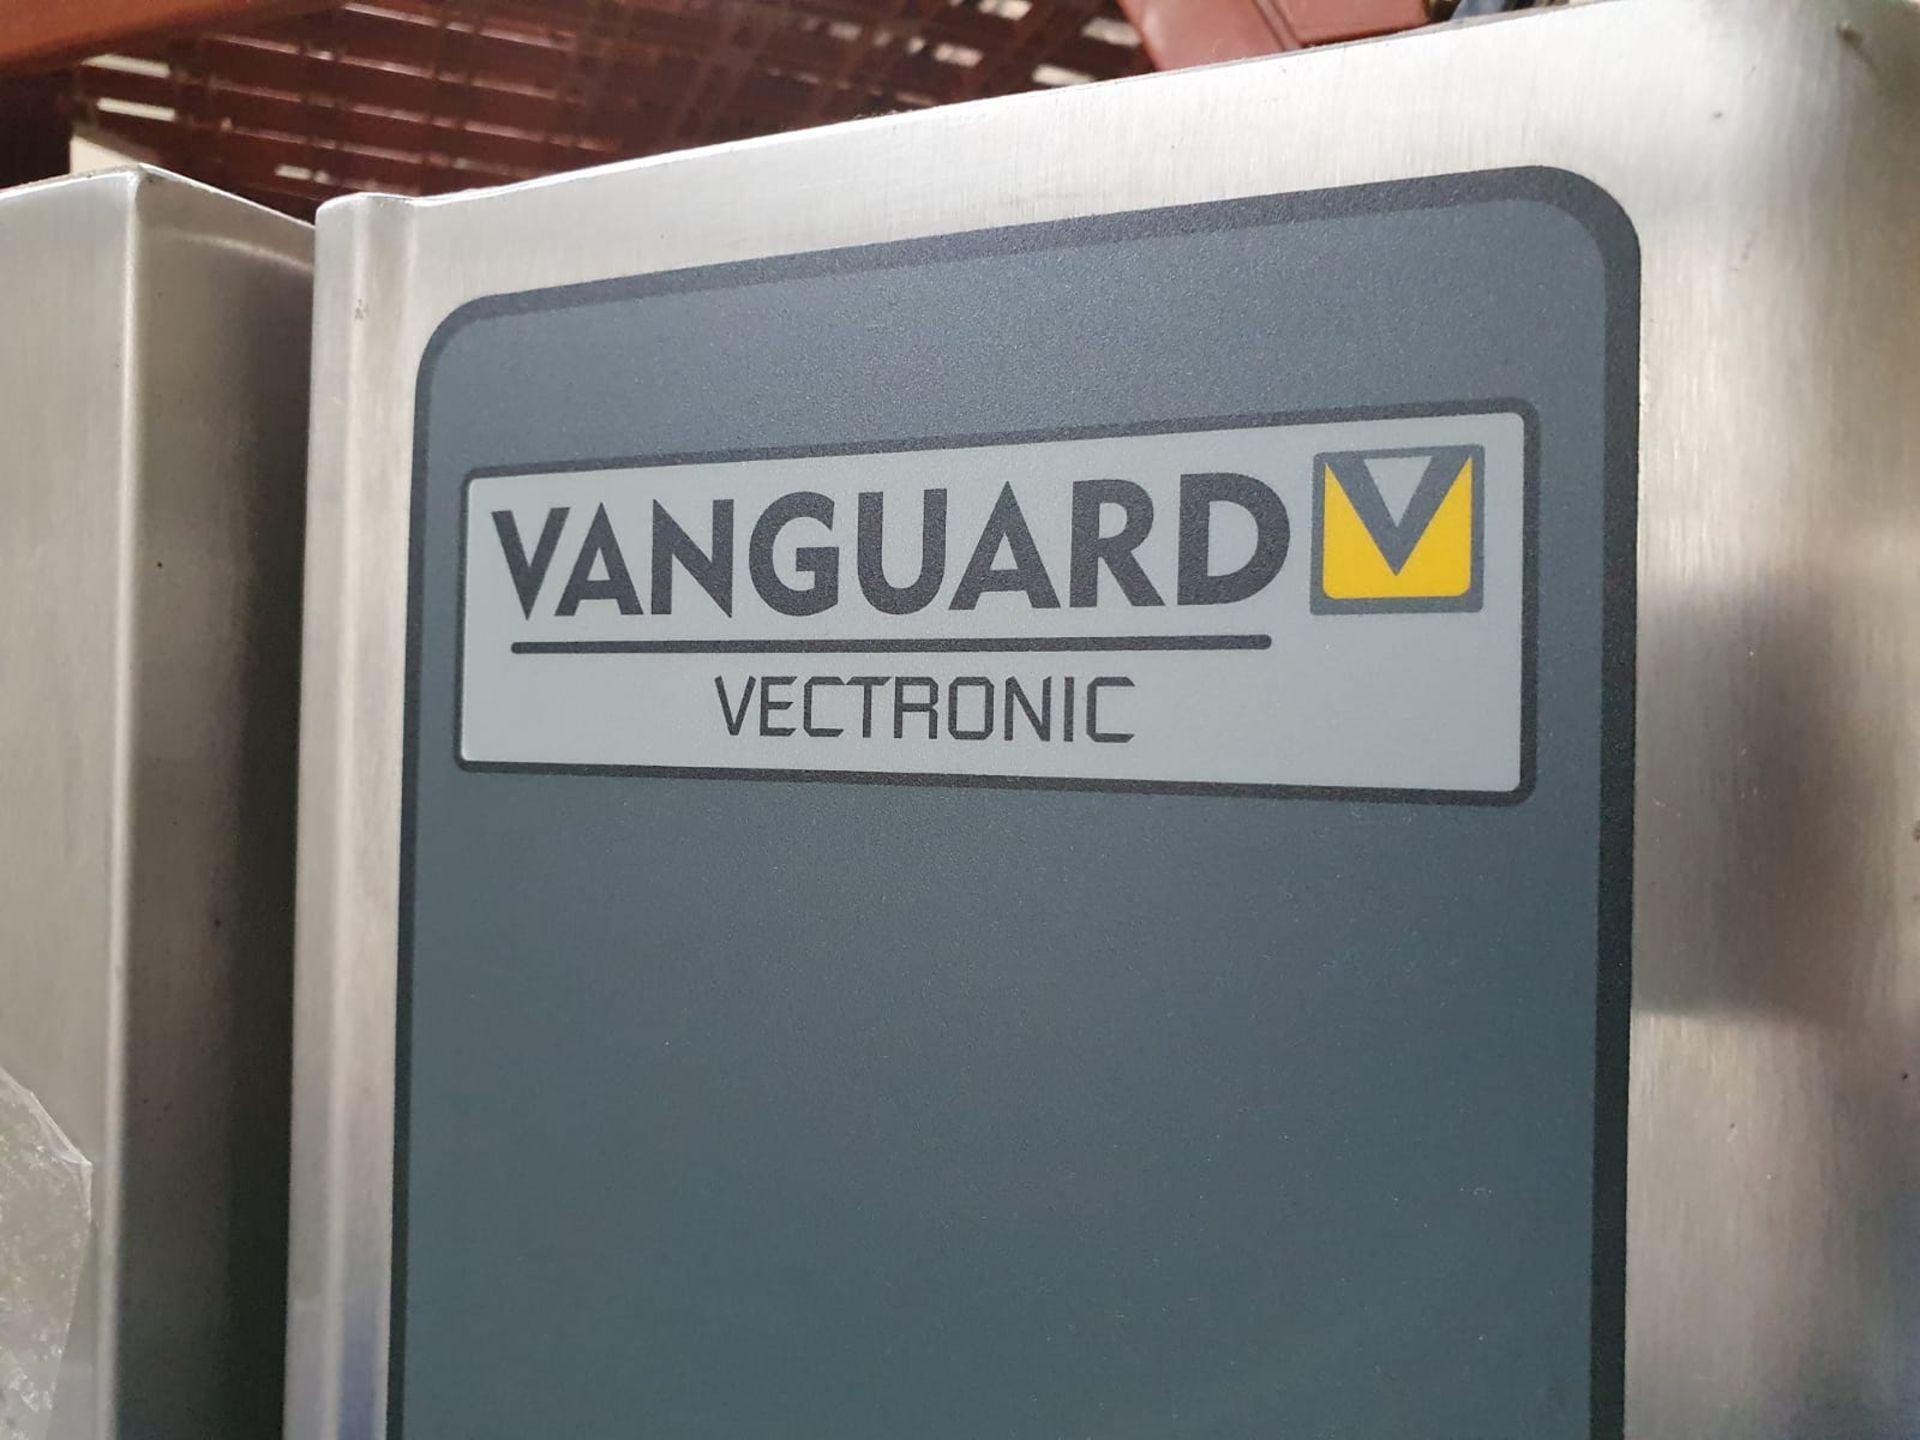 1 x Millers Vanguard Vectronic Bakery Oven - Type 958M - 3 Phase - CL529 - Location: Wakefield WF2 - Image 9 of 9